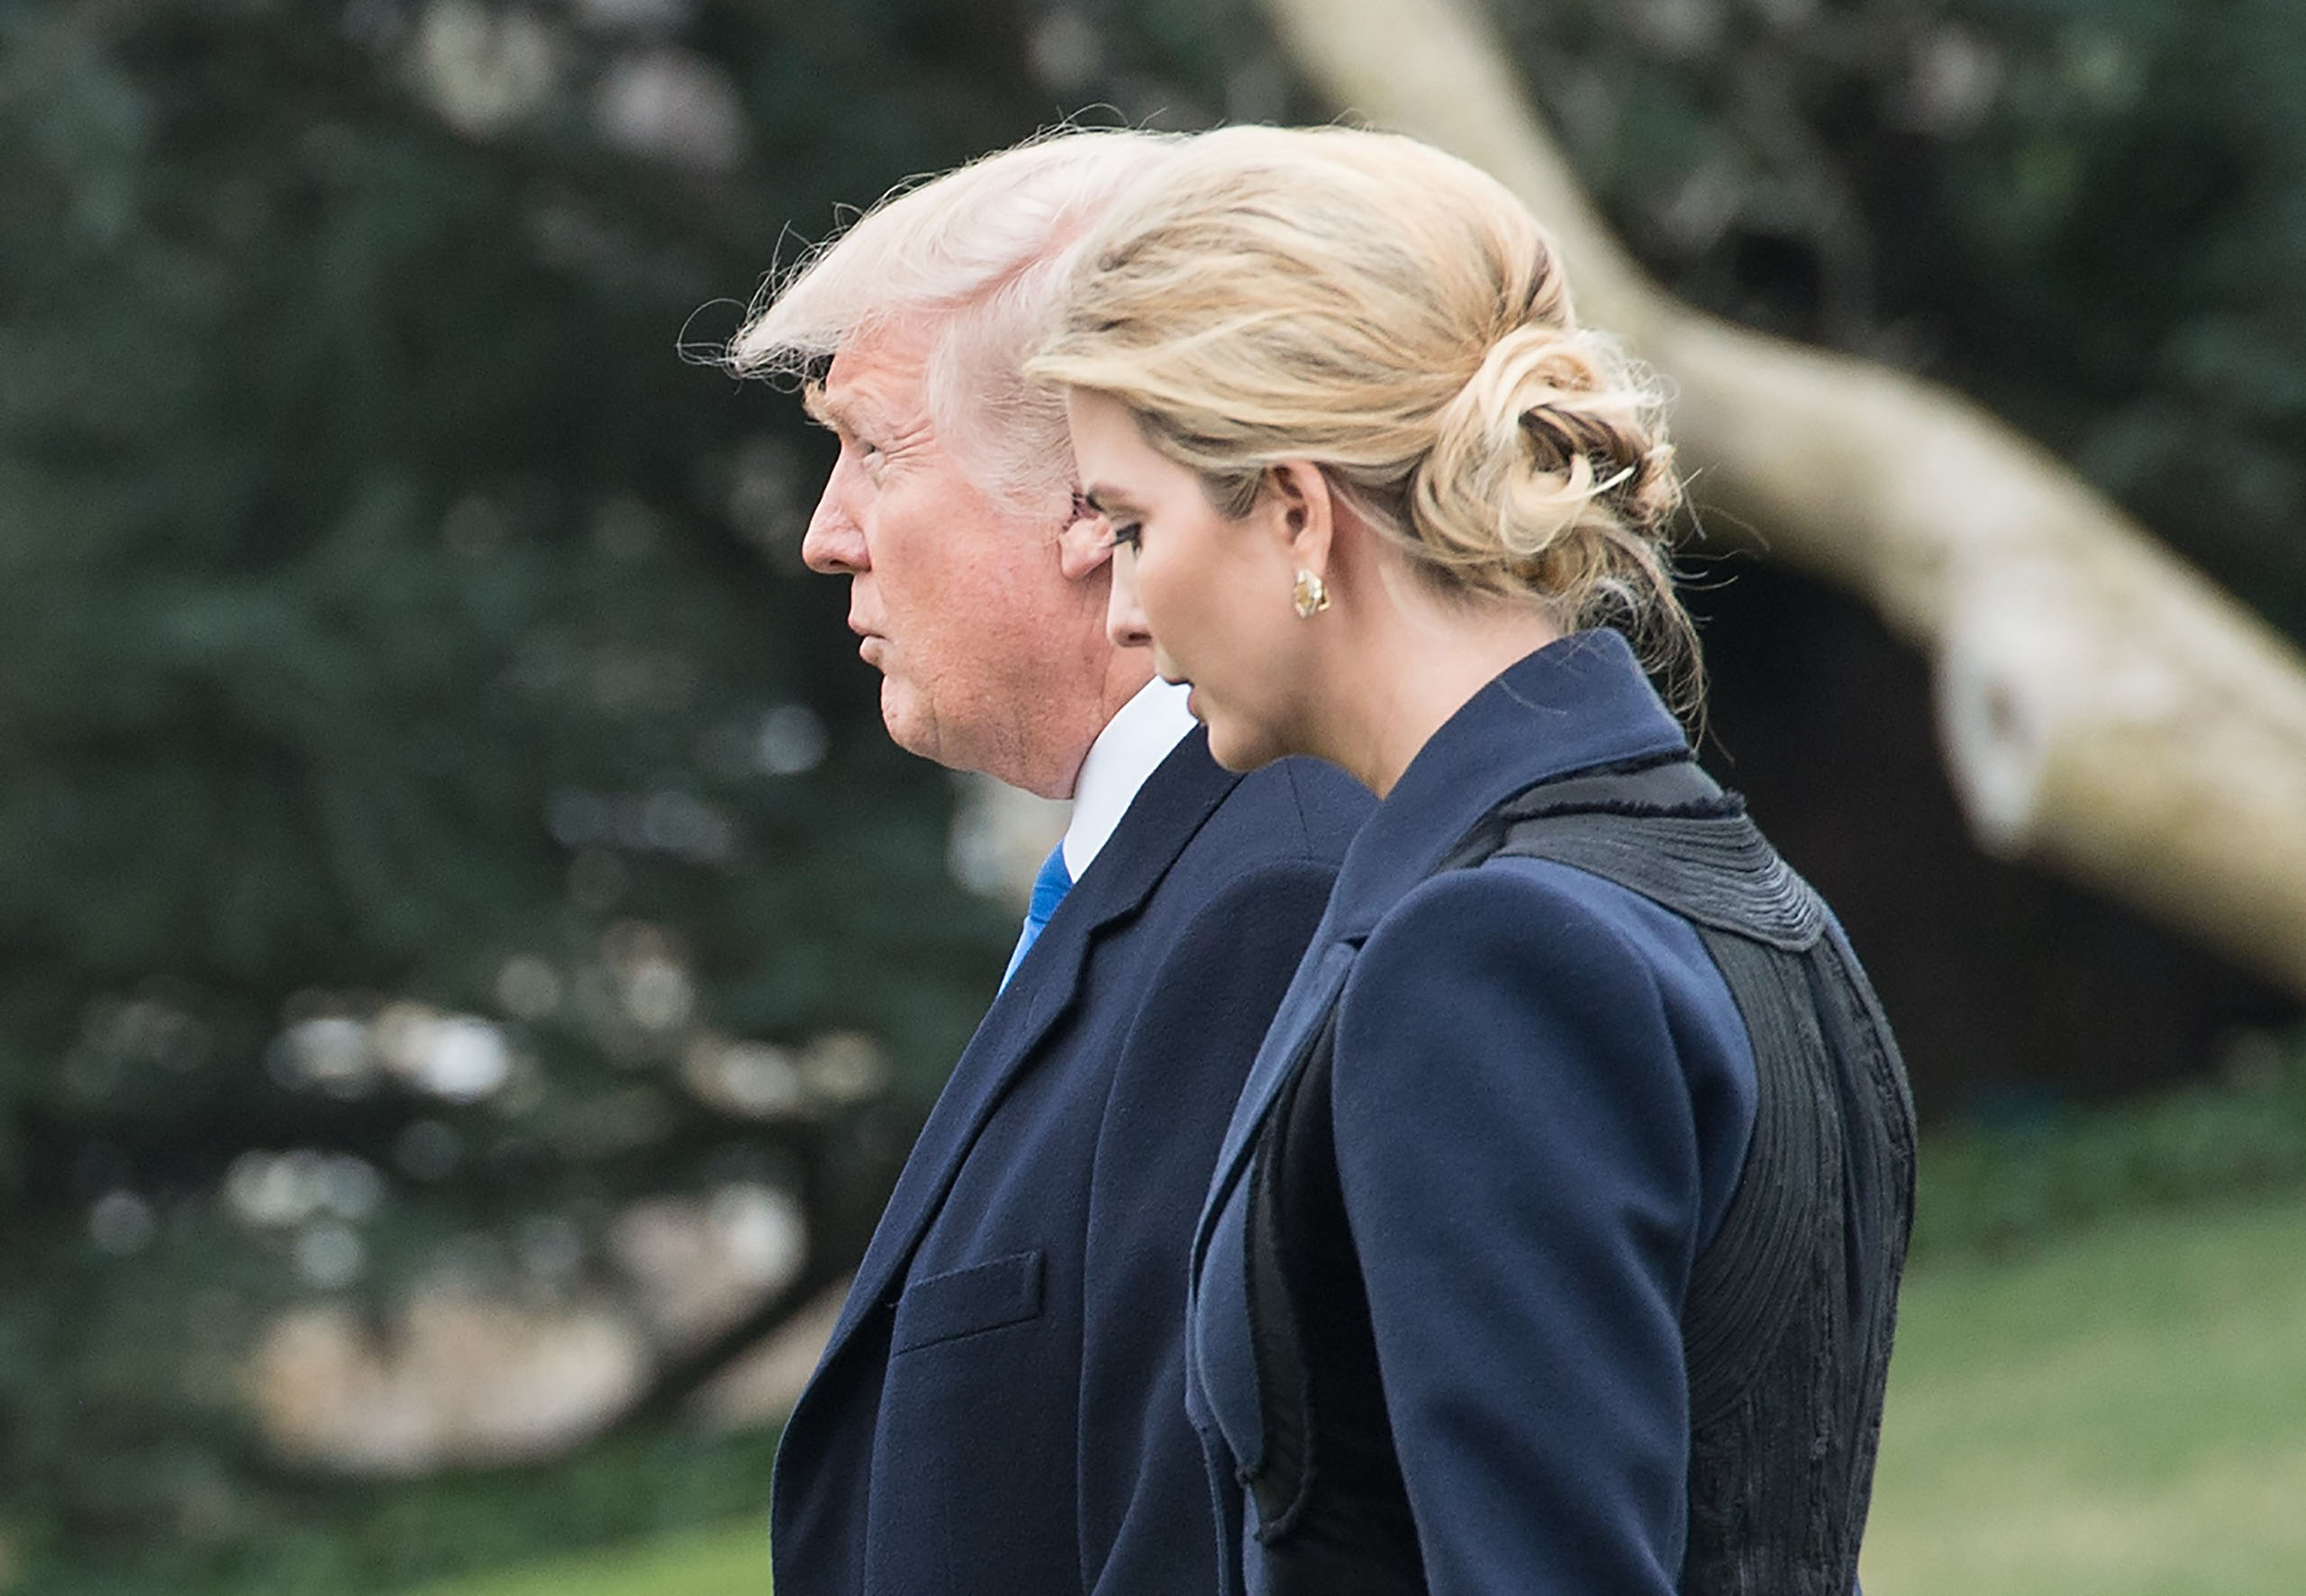 President Donald Trump and his daughter Ivanka walk to board Marine One at the White House in Washington, on Feb. 1, 2017.